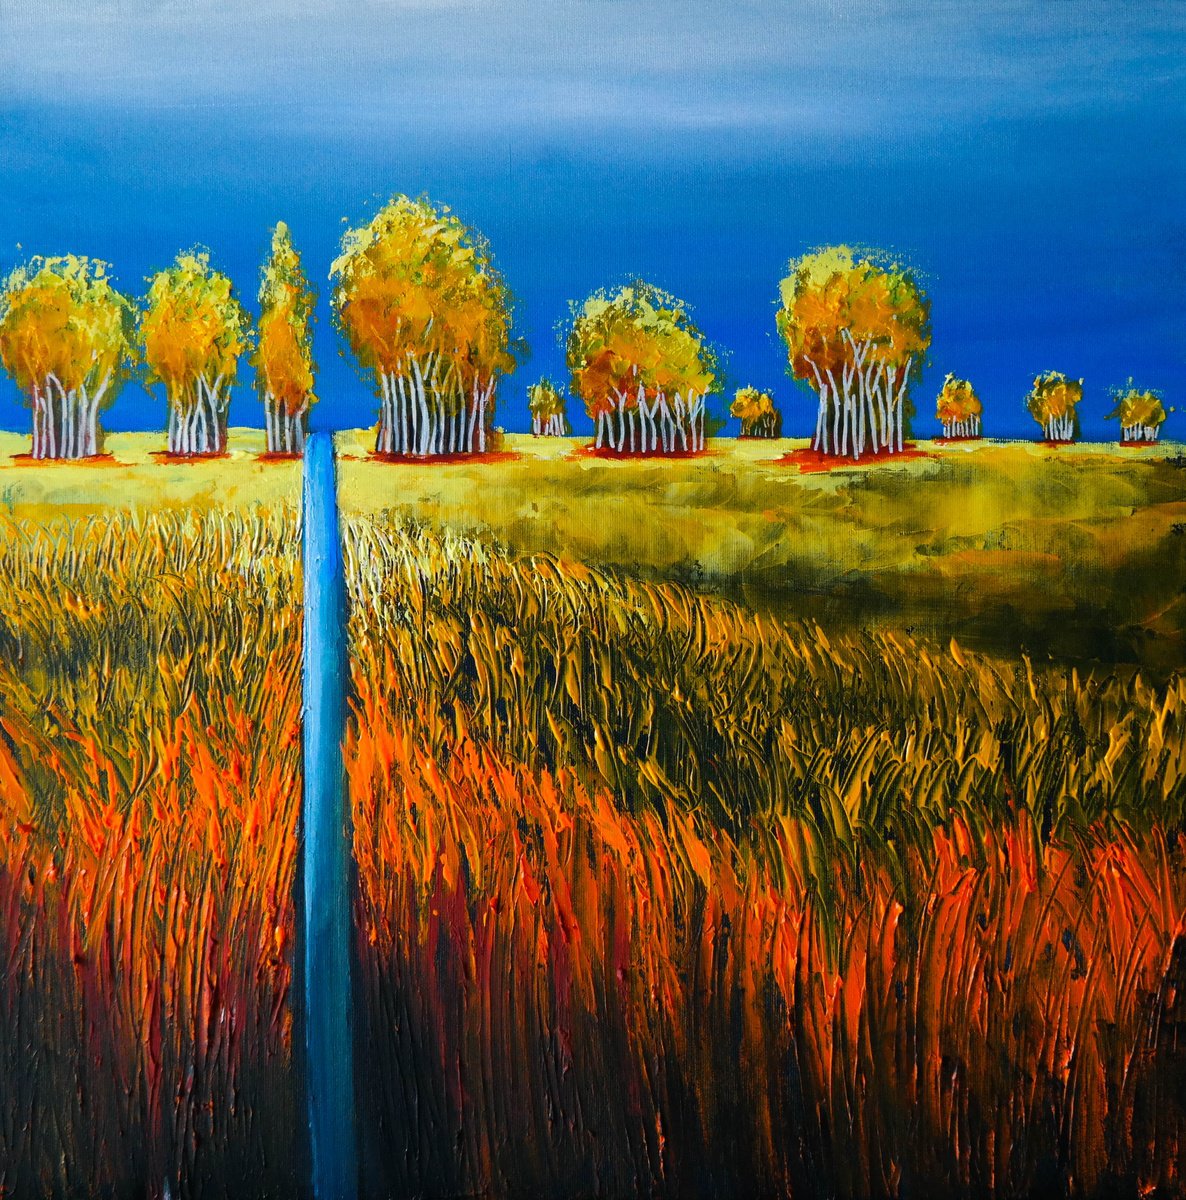 The Yellow Trees   -  Fields and Colors Series by Danijela Dan